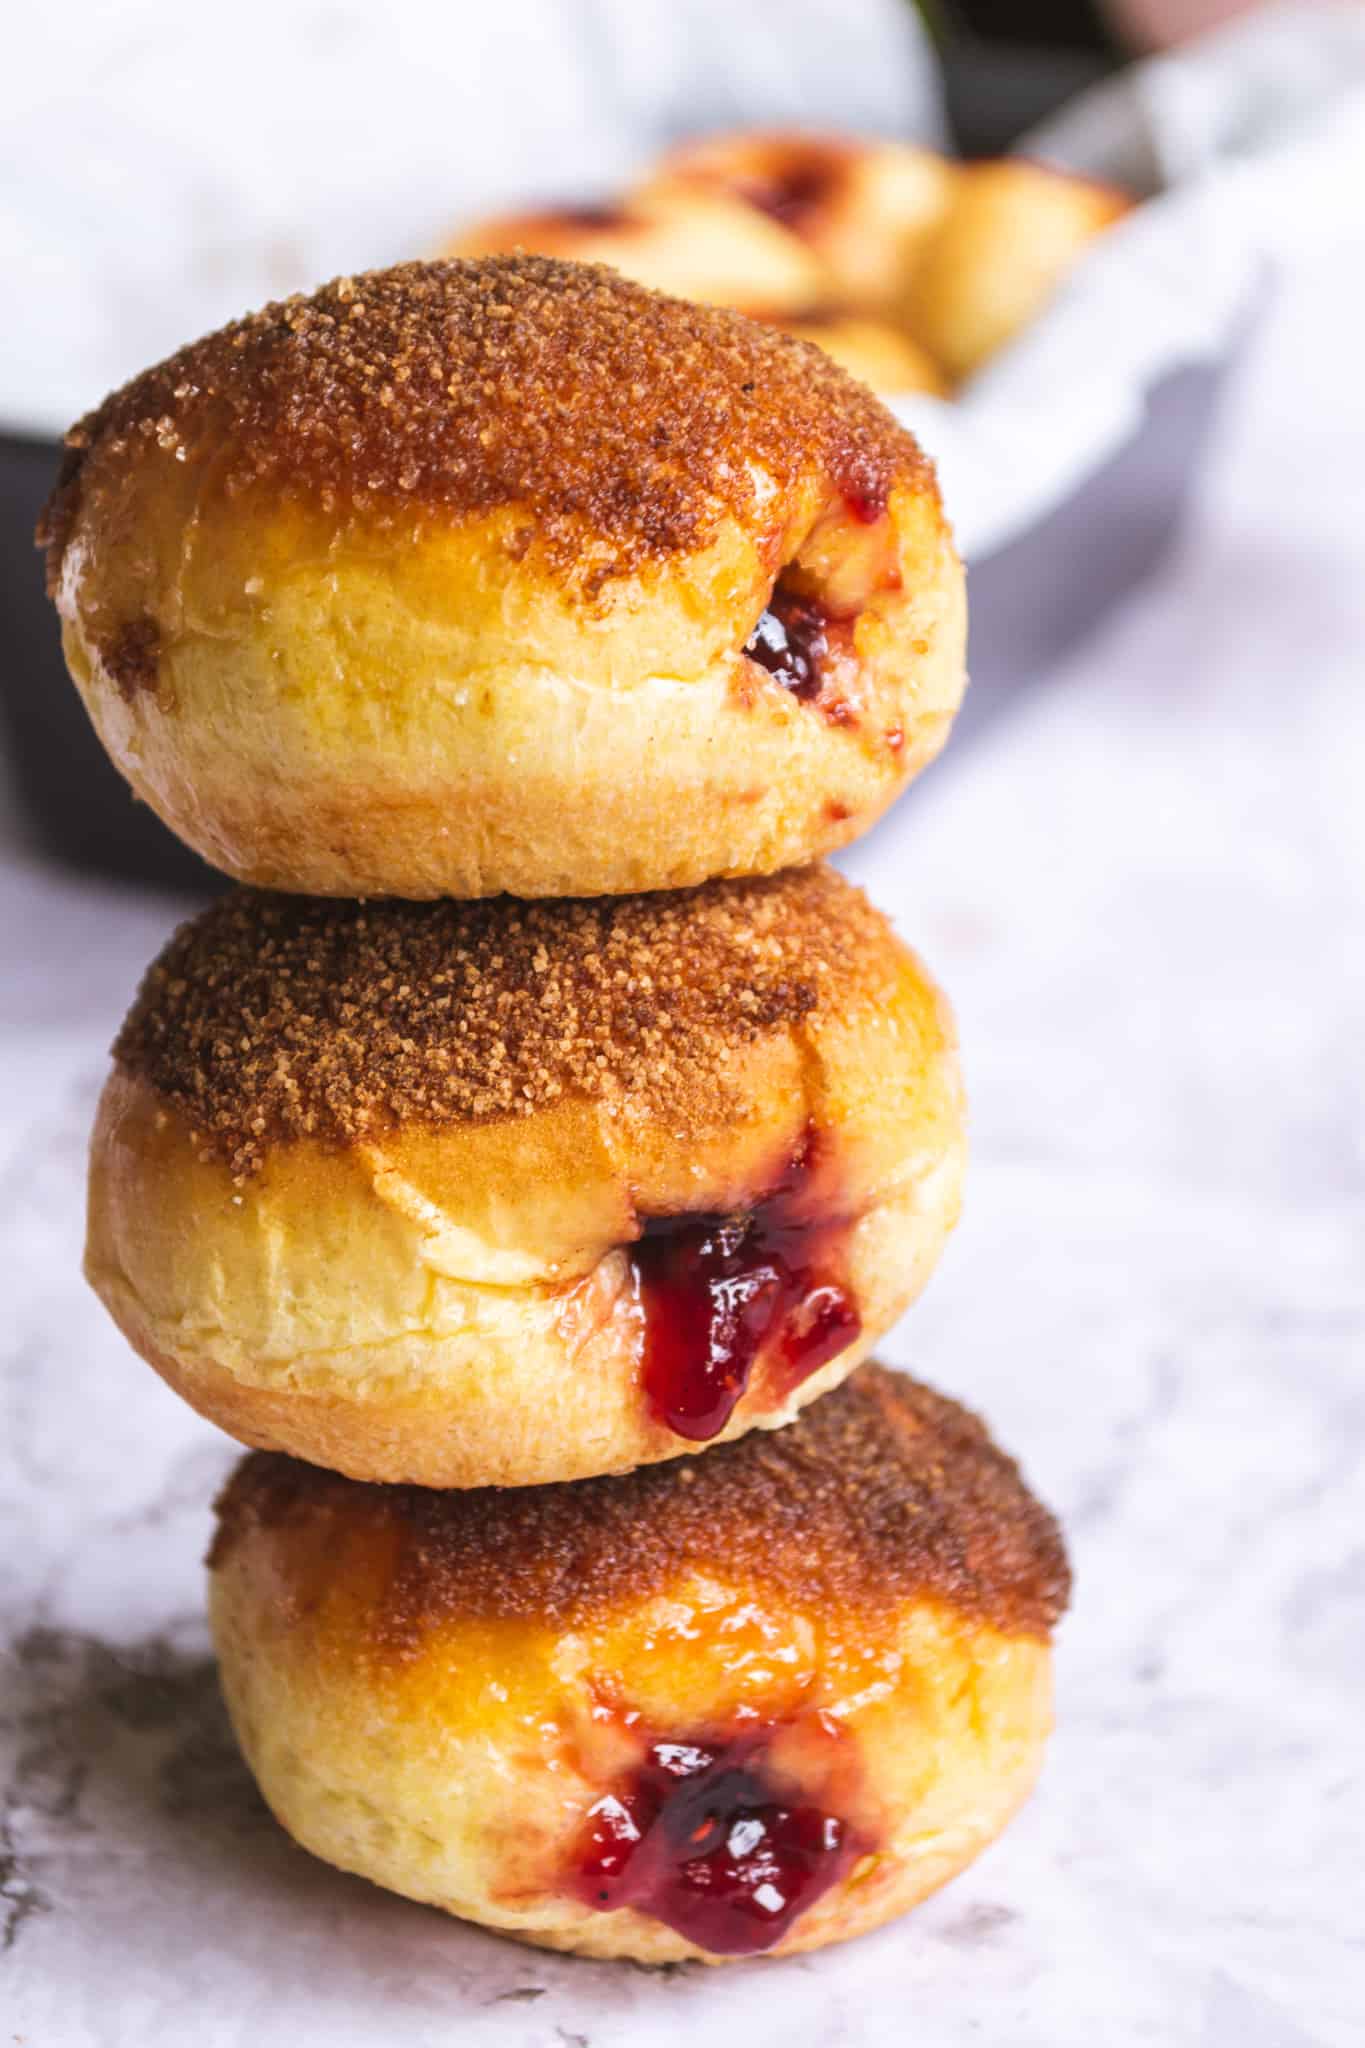 Three brioche donuts stacked on top of each other with jam coming out.